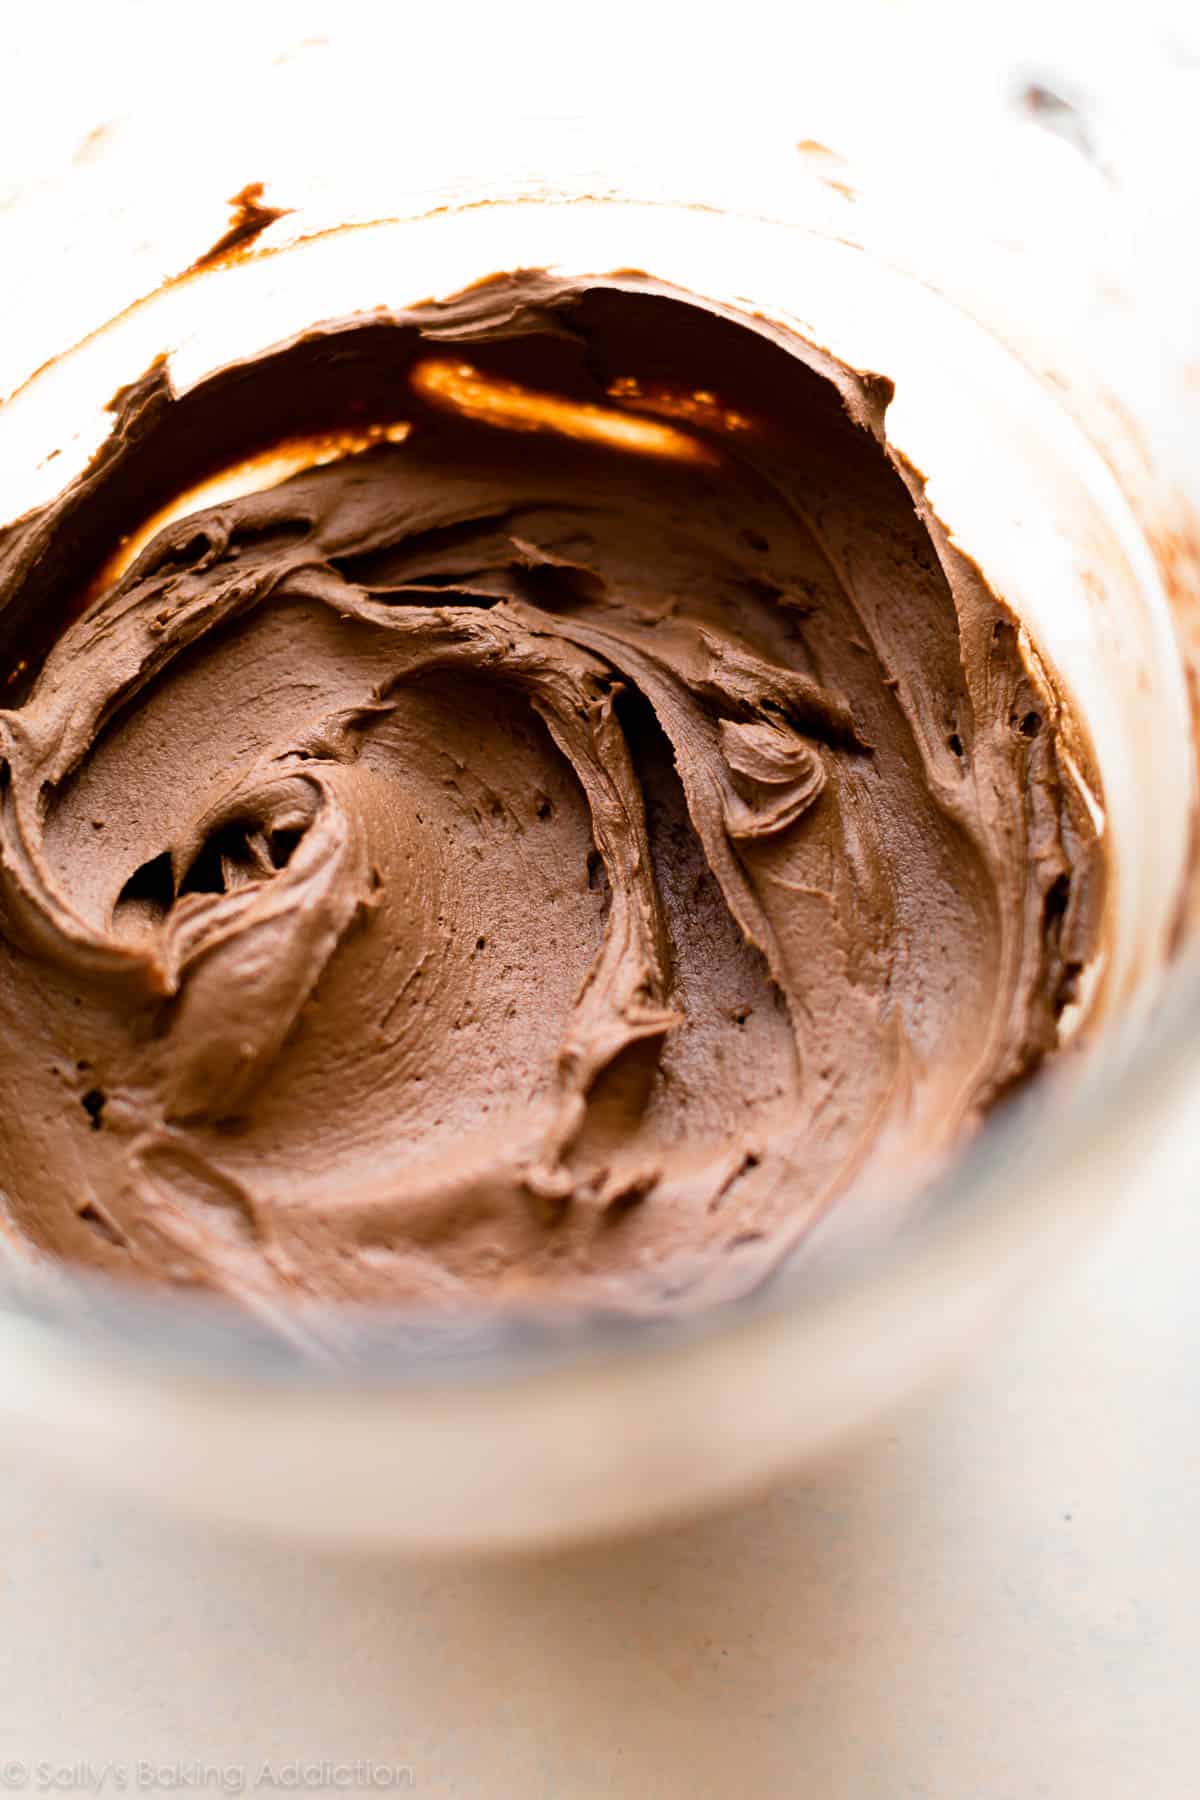 chocolate peanut butter frosting in a glass bowl